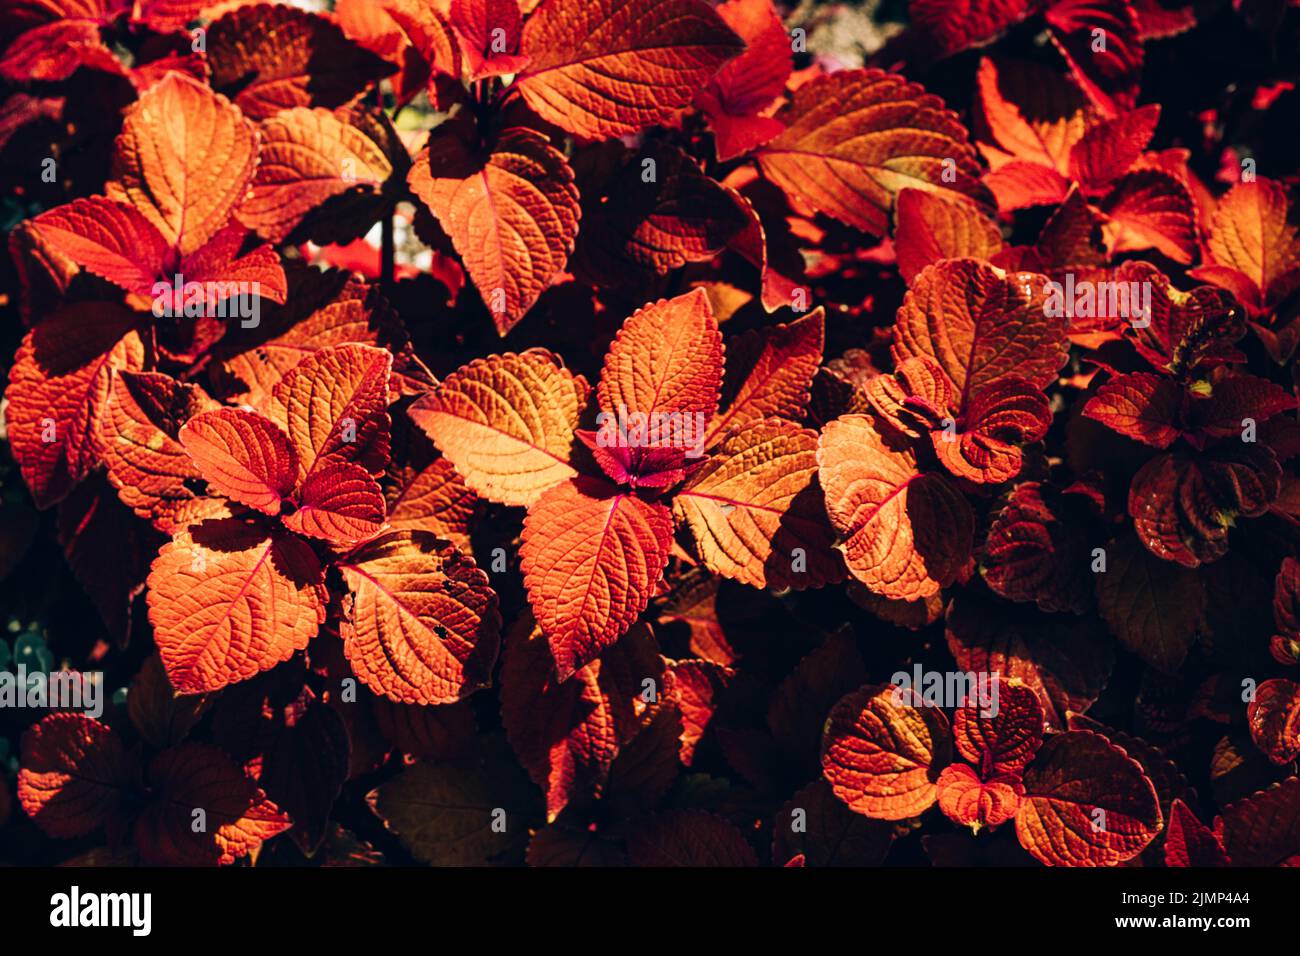 Close-up of burgundy/ red and yellow leaves of solenostemon Scutellarioides Henna, Coleus Henna Stock Photo